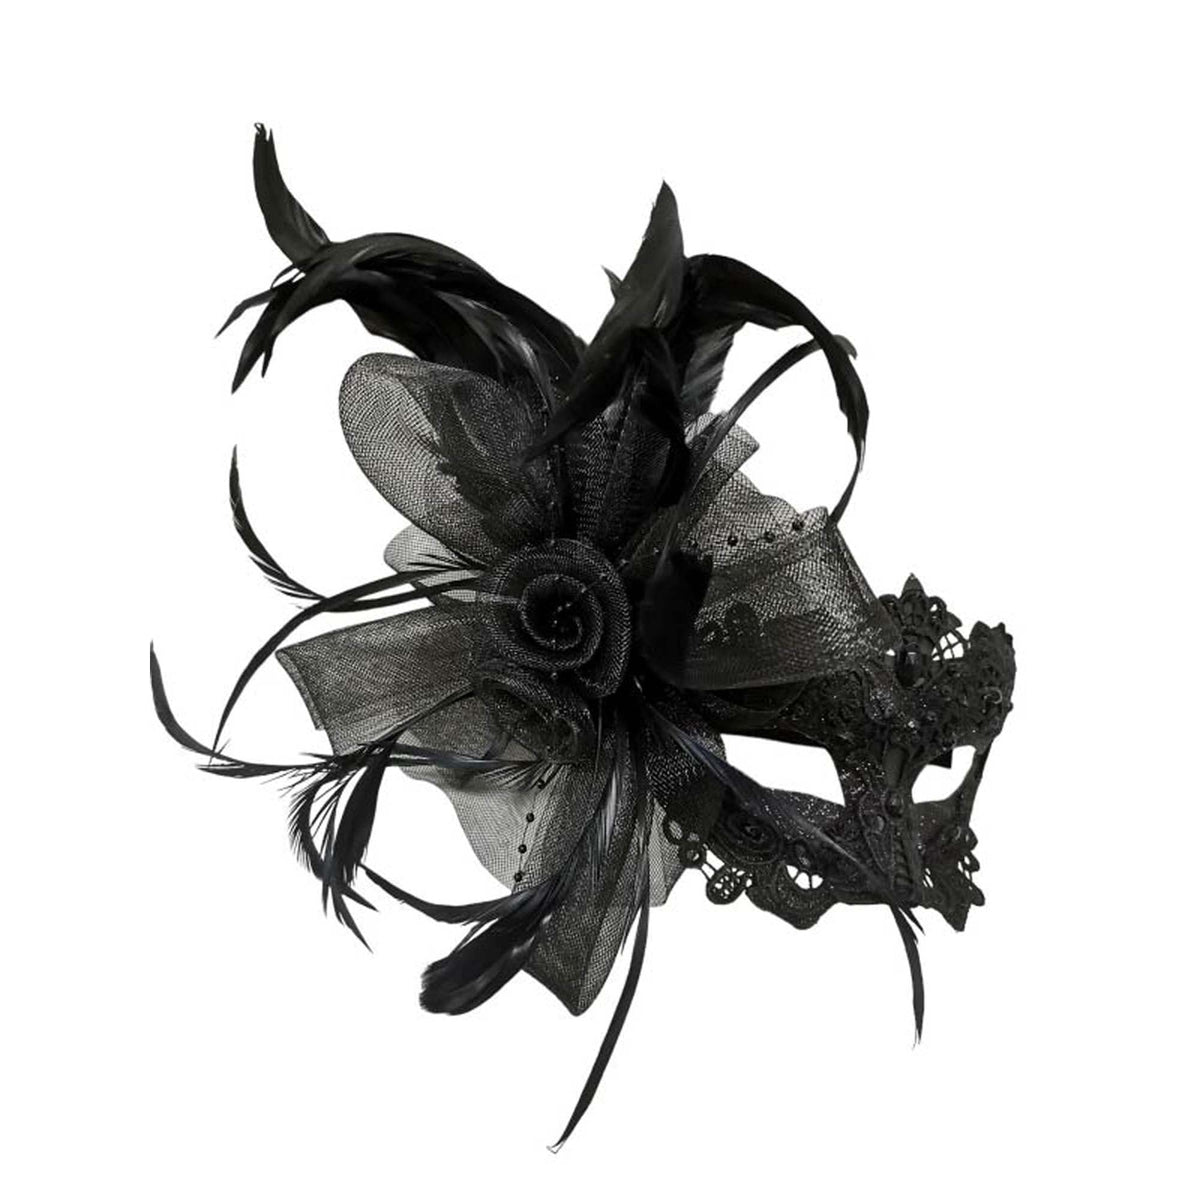 KBW GLOBAL CORP Costume Accessories Black Venetian Mask with Feather and Flower, 1 Count 831687063831